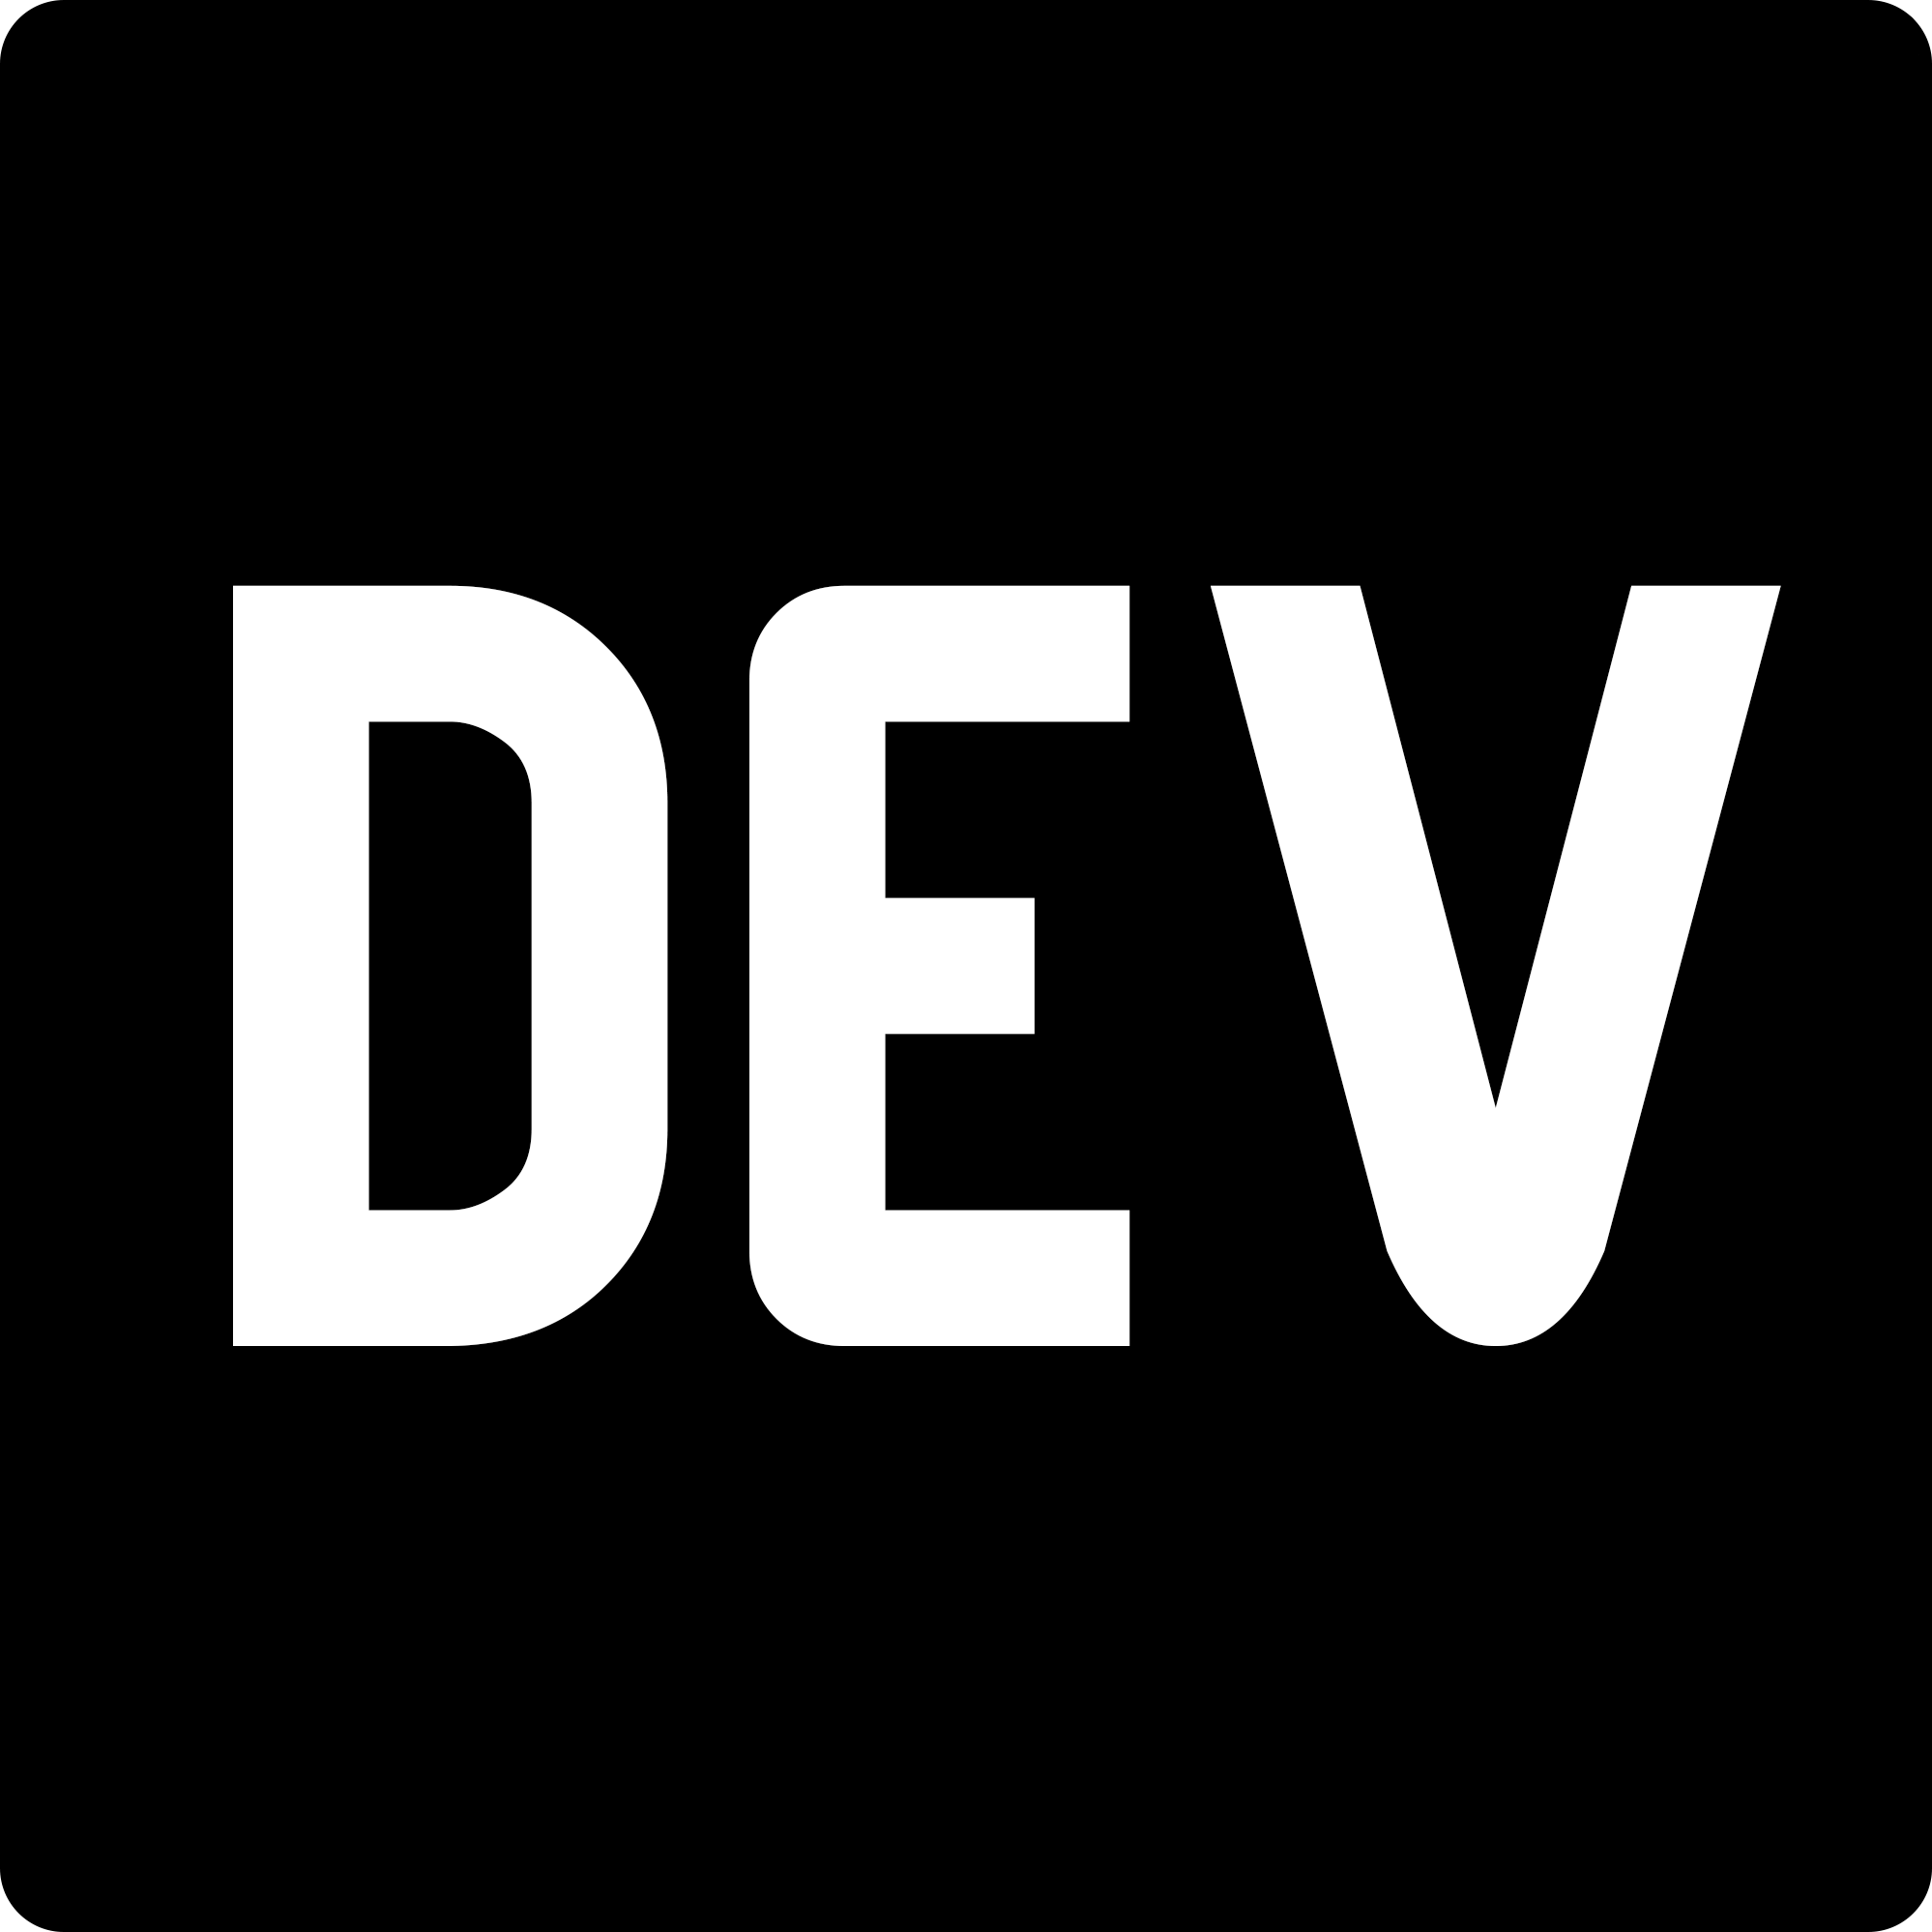 https://dev.to/briancaffey/setting-up-ad-hoc-development-environments-for-django-applications-with-aws-ecs-terraform-and-github-actions-4abh